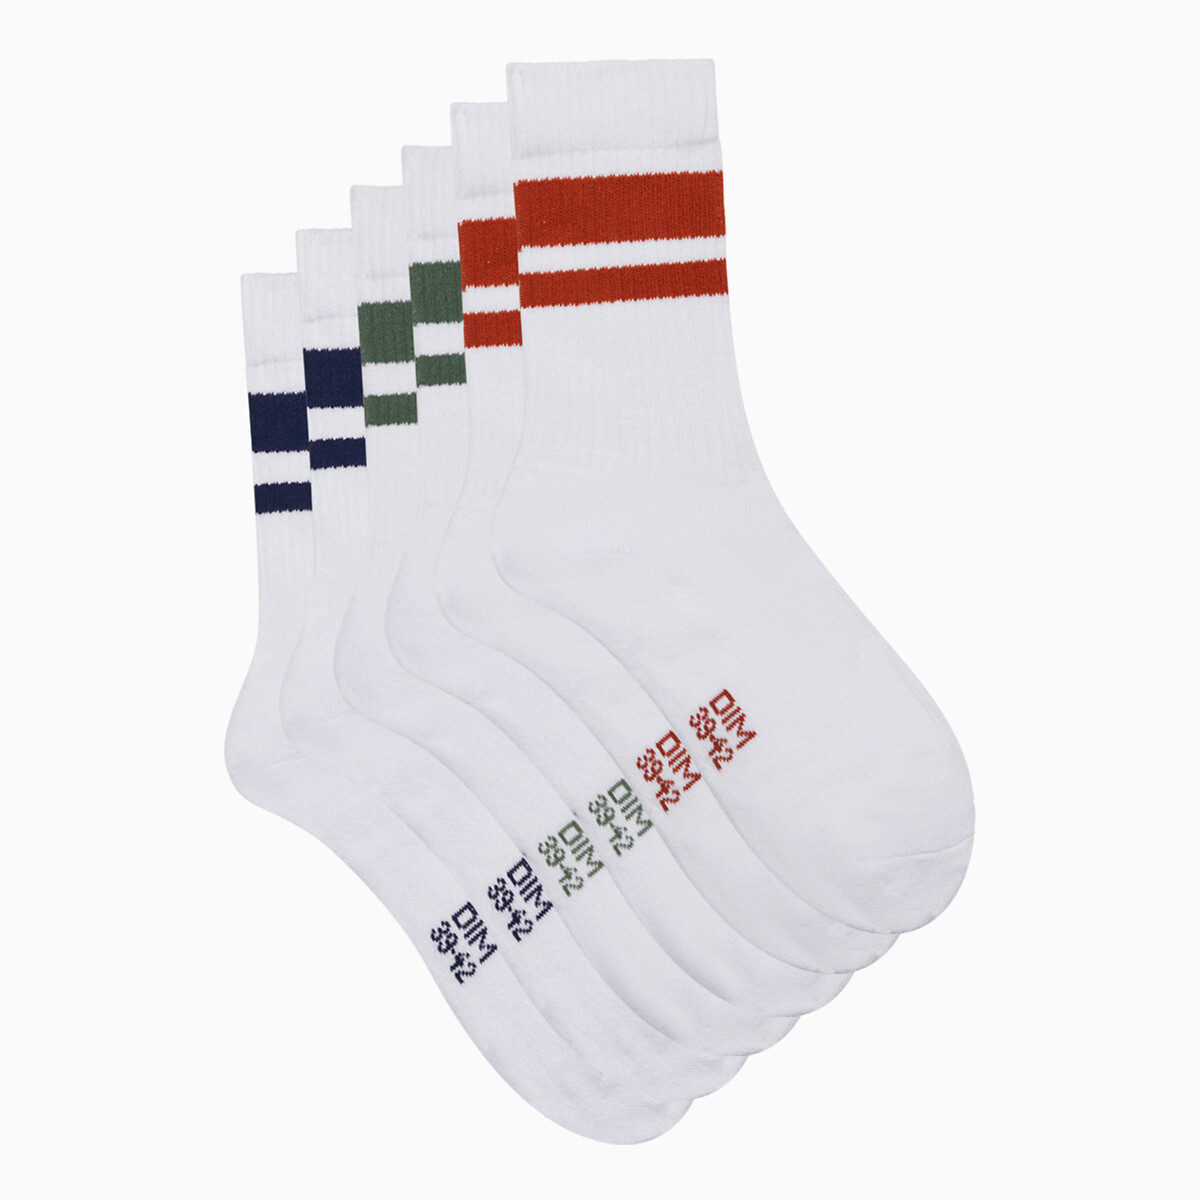 Image of Pack of 3 Pairs of Sports Socks in Cotton Mix